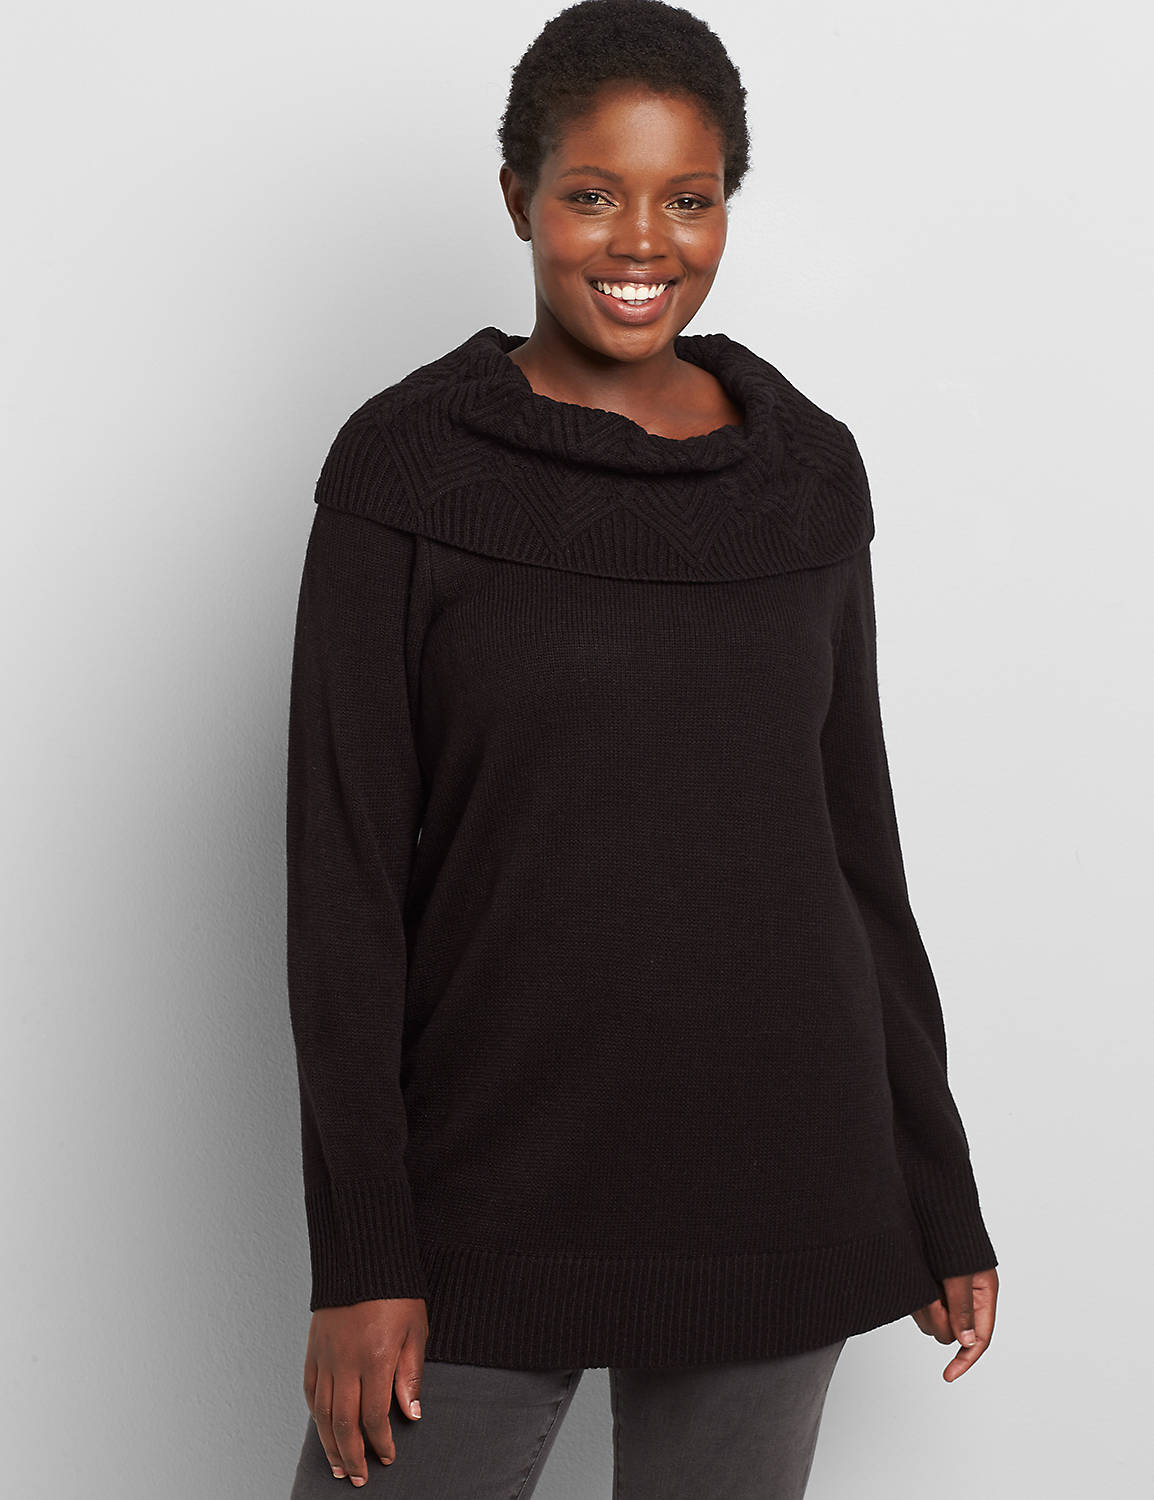 OUTLET LONG SLEEVE COWL POINTELLE TUNIC SWEATER 1113638:Pitch Black LB 1000322:14/16 Product Image 1